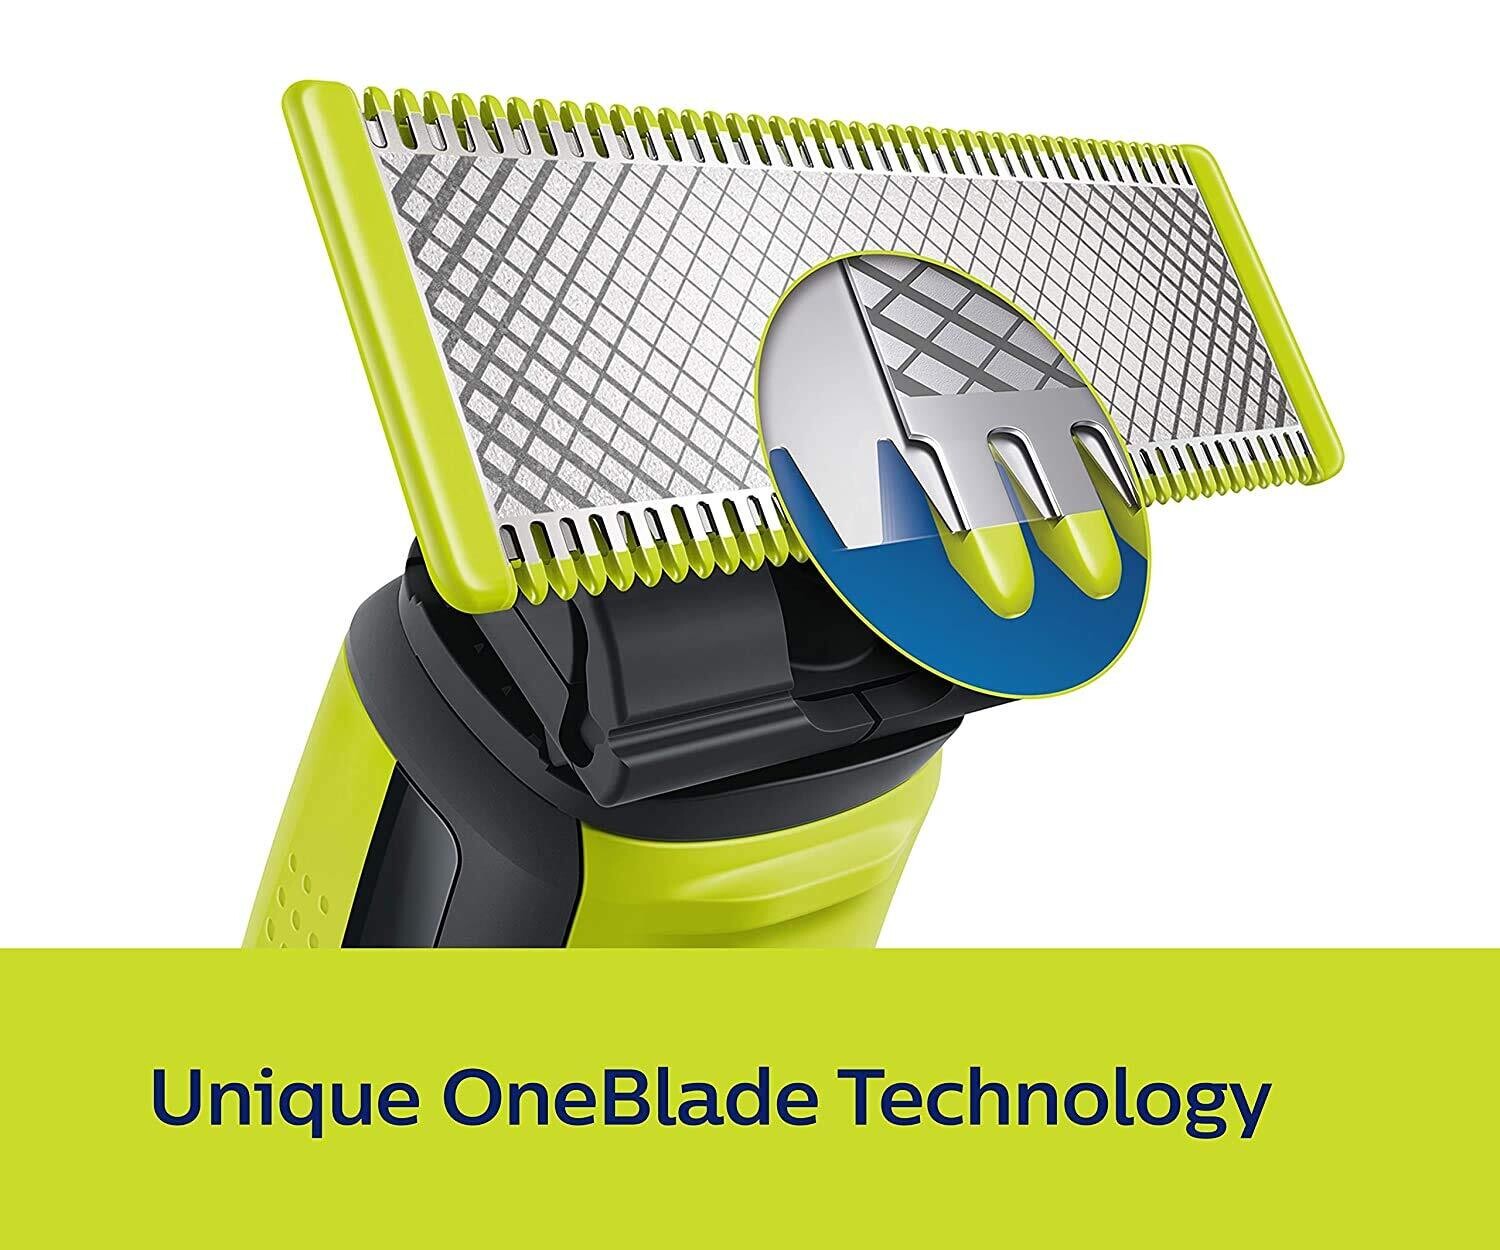 Philips QP210/50 Oneblade Replaceable Blade